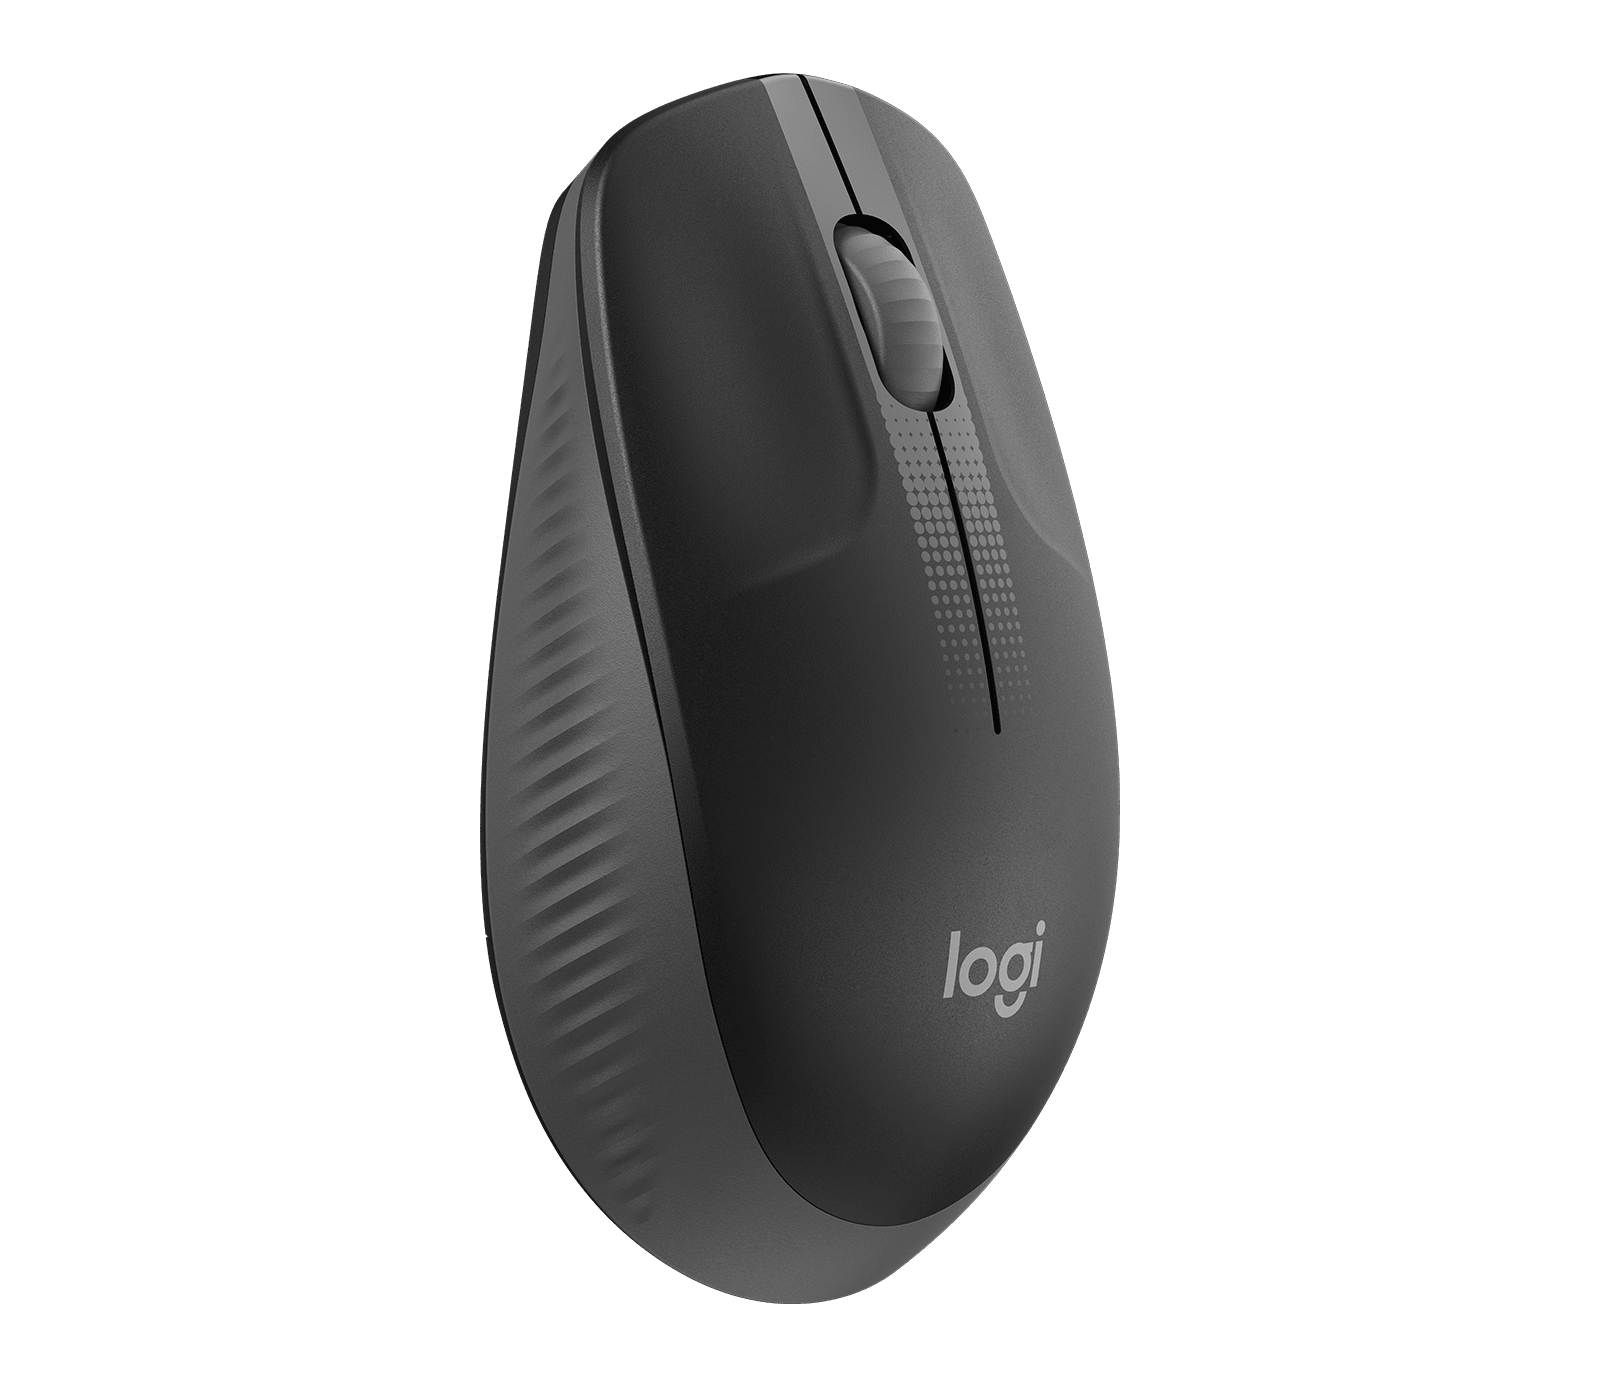 https://banleong.com.sg/wp-content/uploads/2021/09/m190-wireless-mouse-charcoal-gallery-02.png